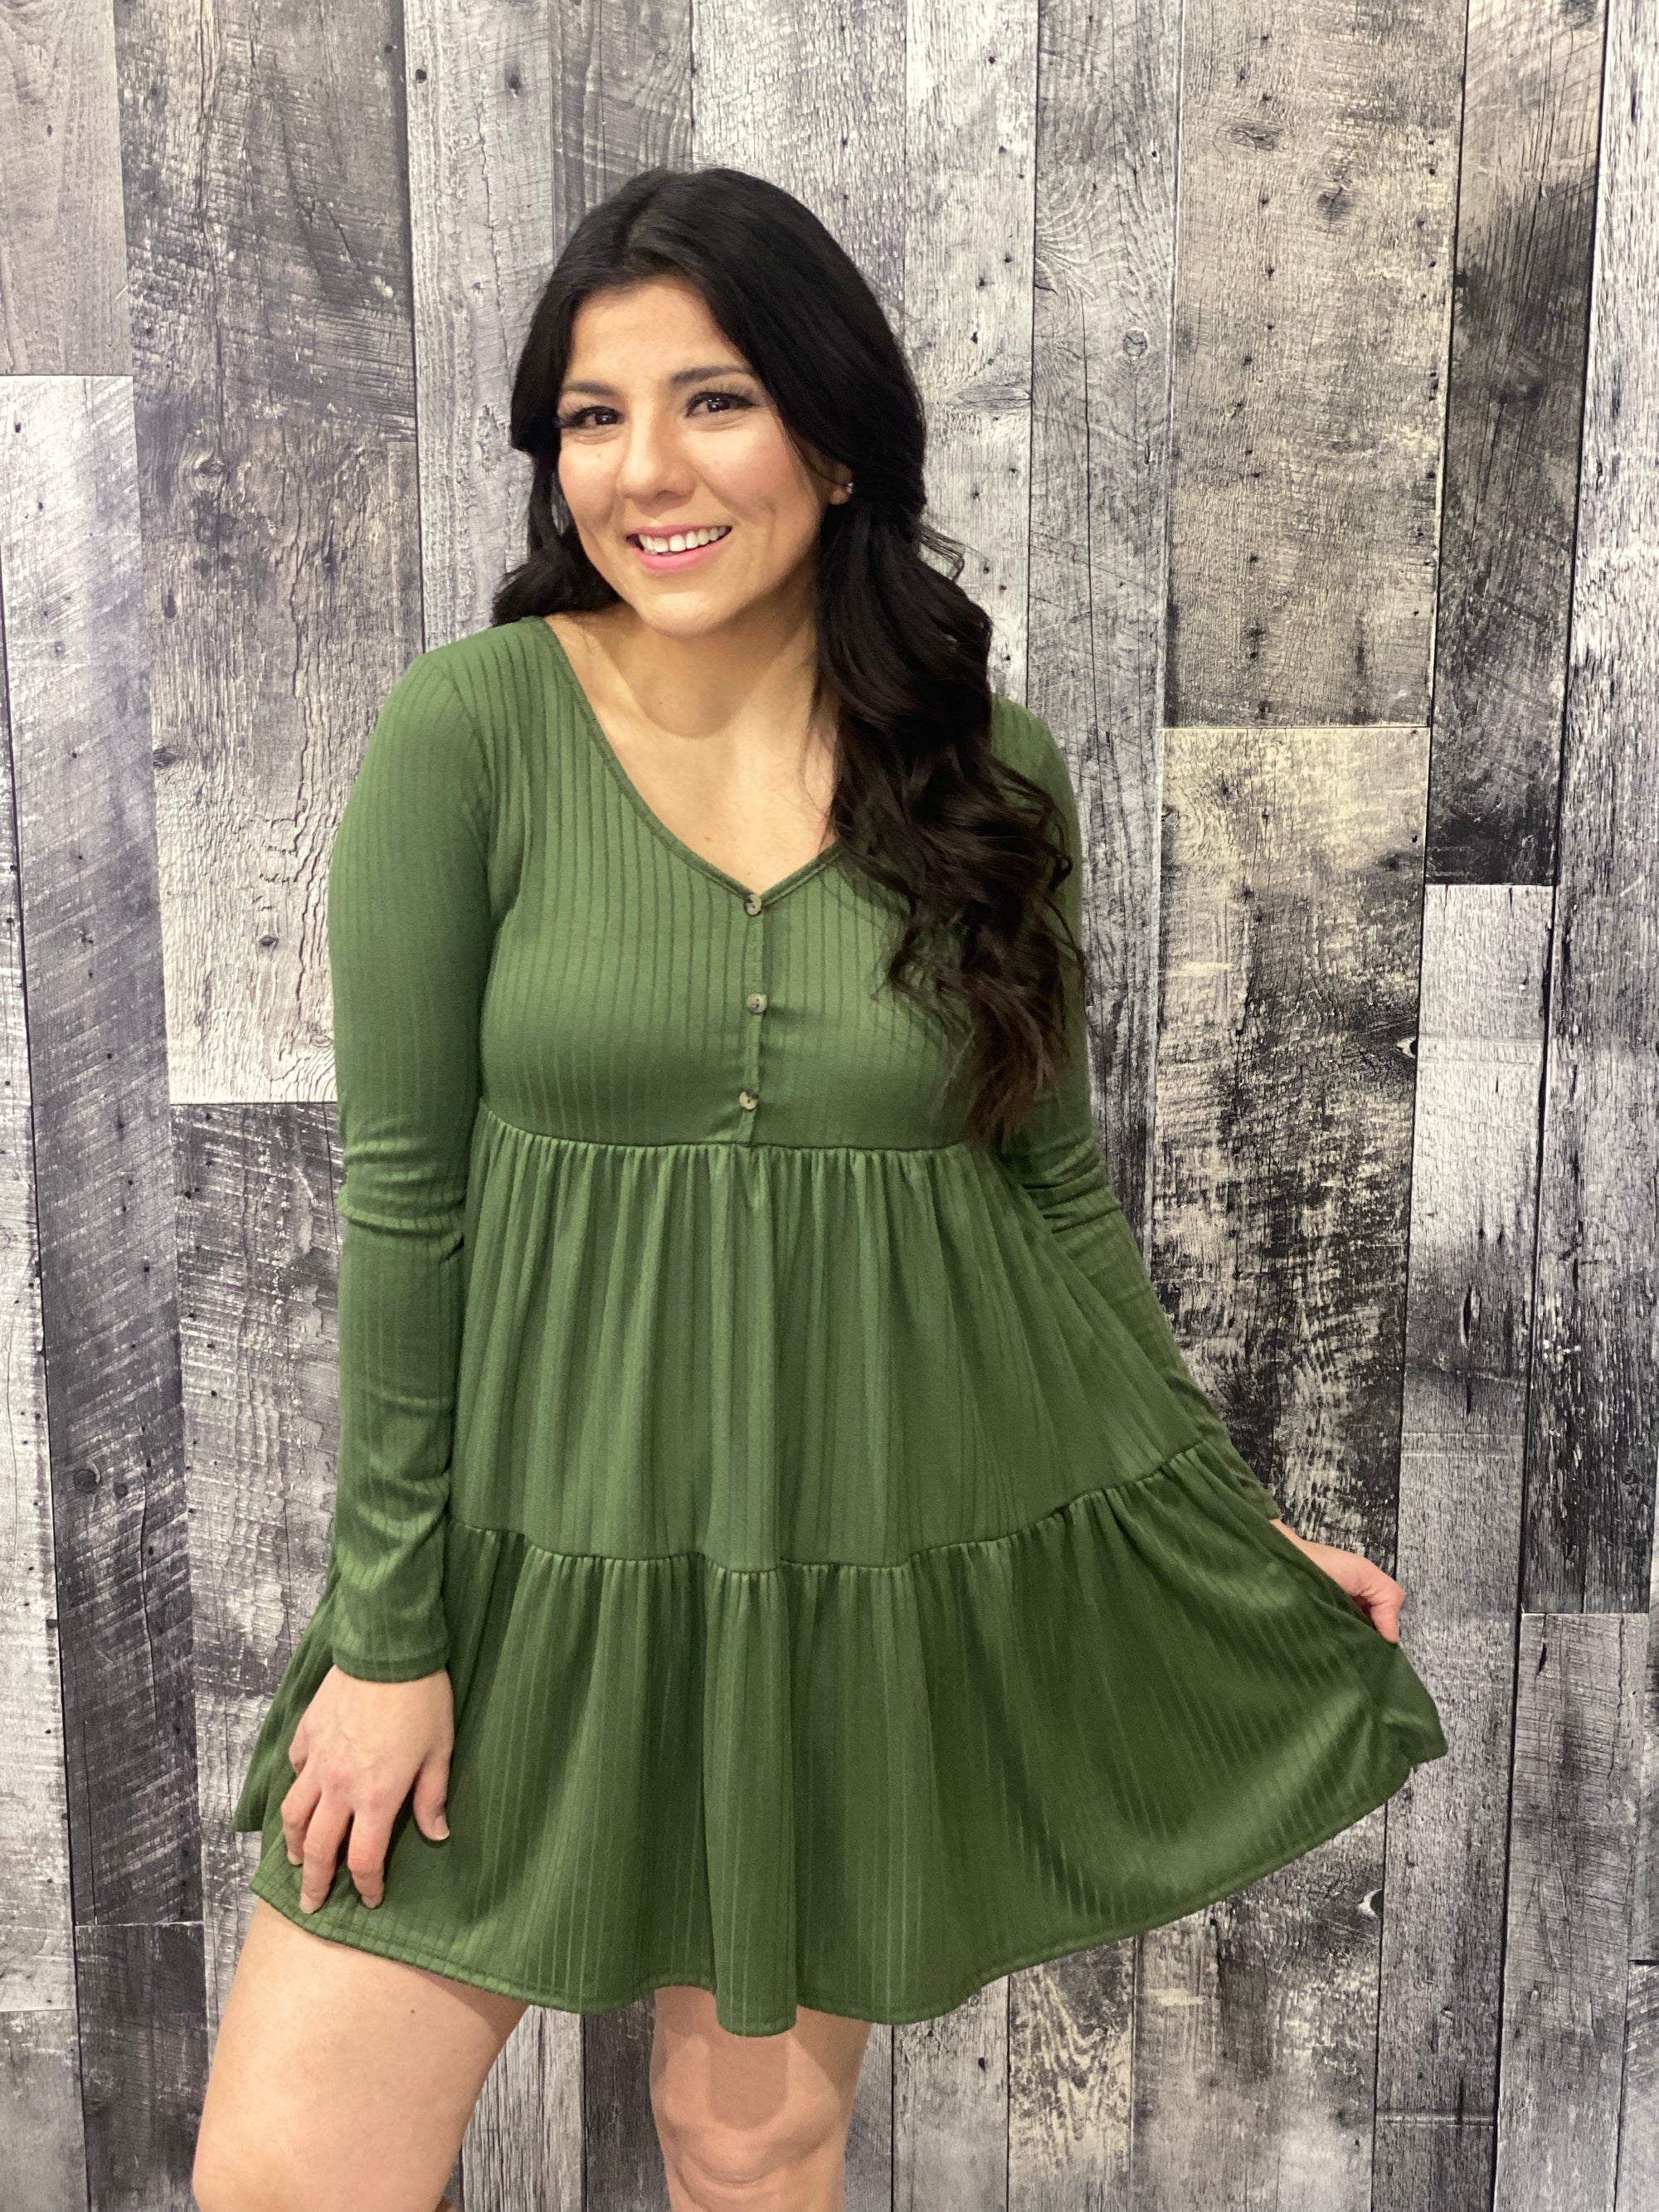 Ribbed Button Tiered Dress - Olive  (Small - 3X)- FINAL SALE